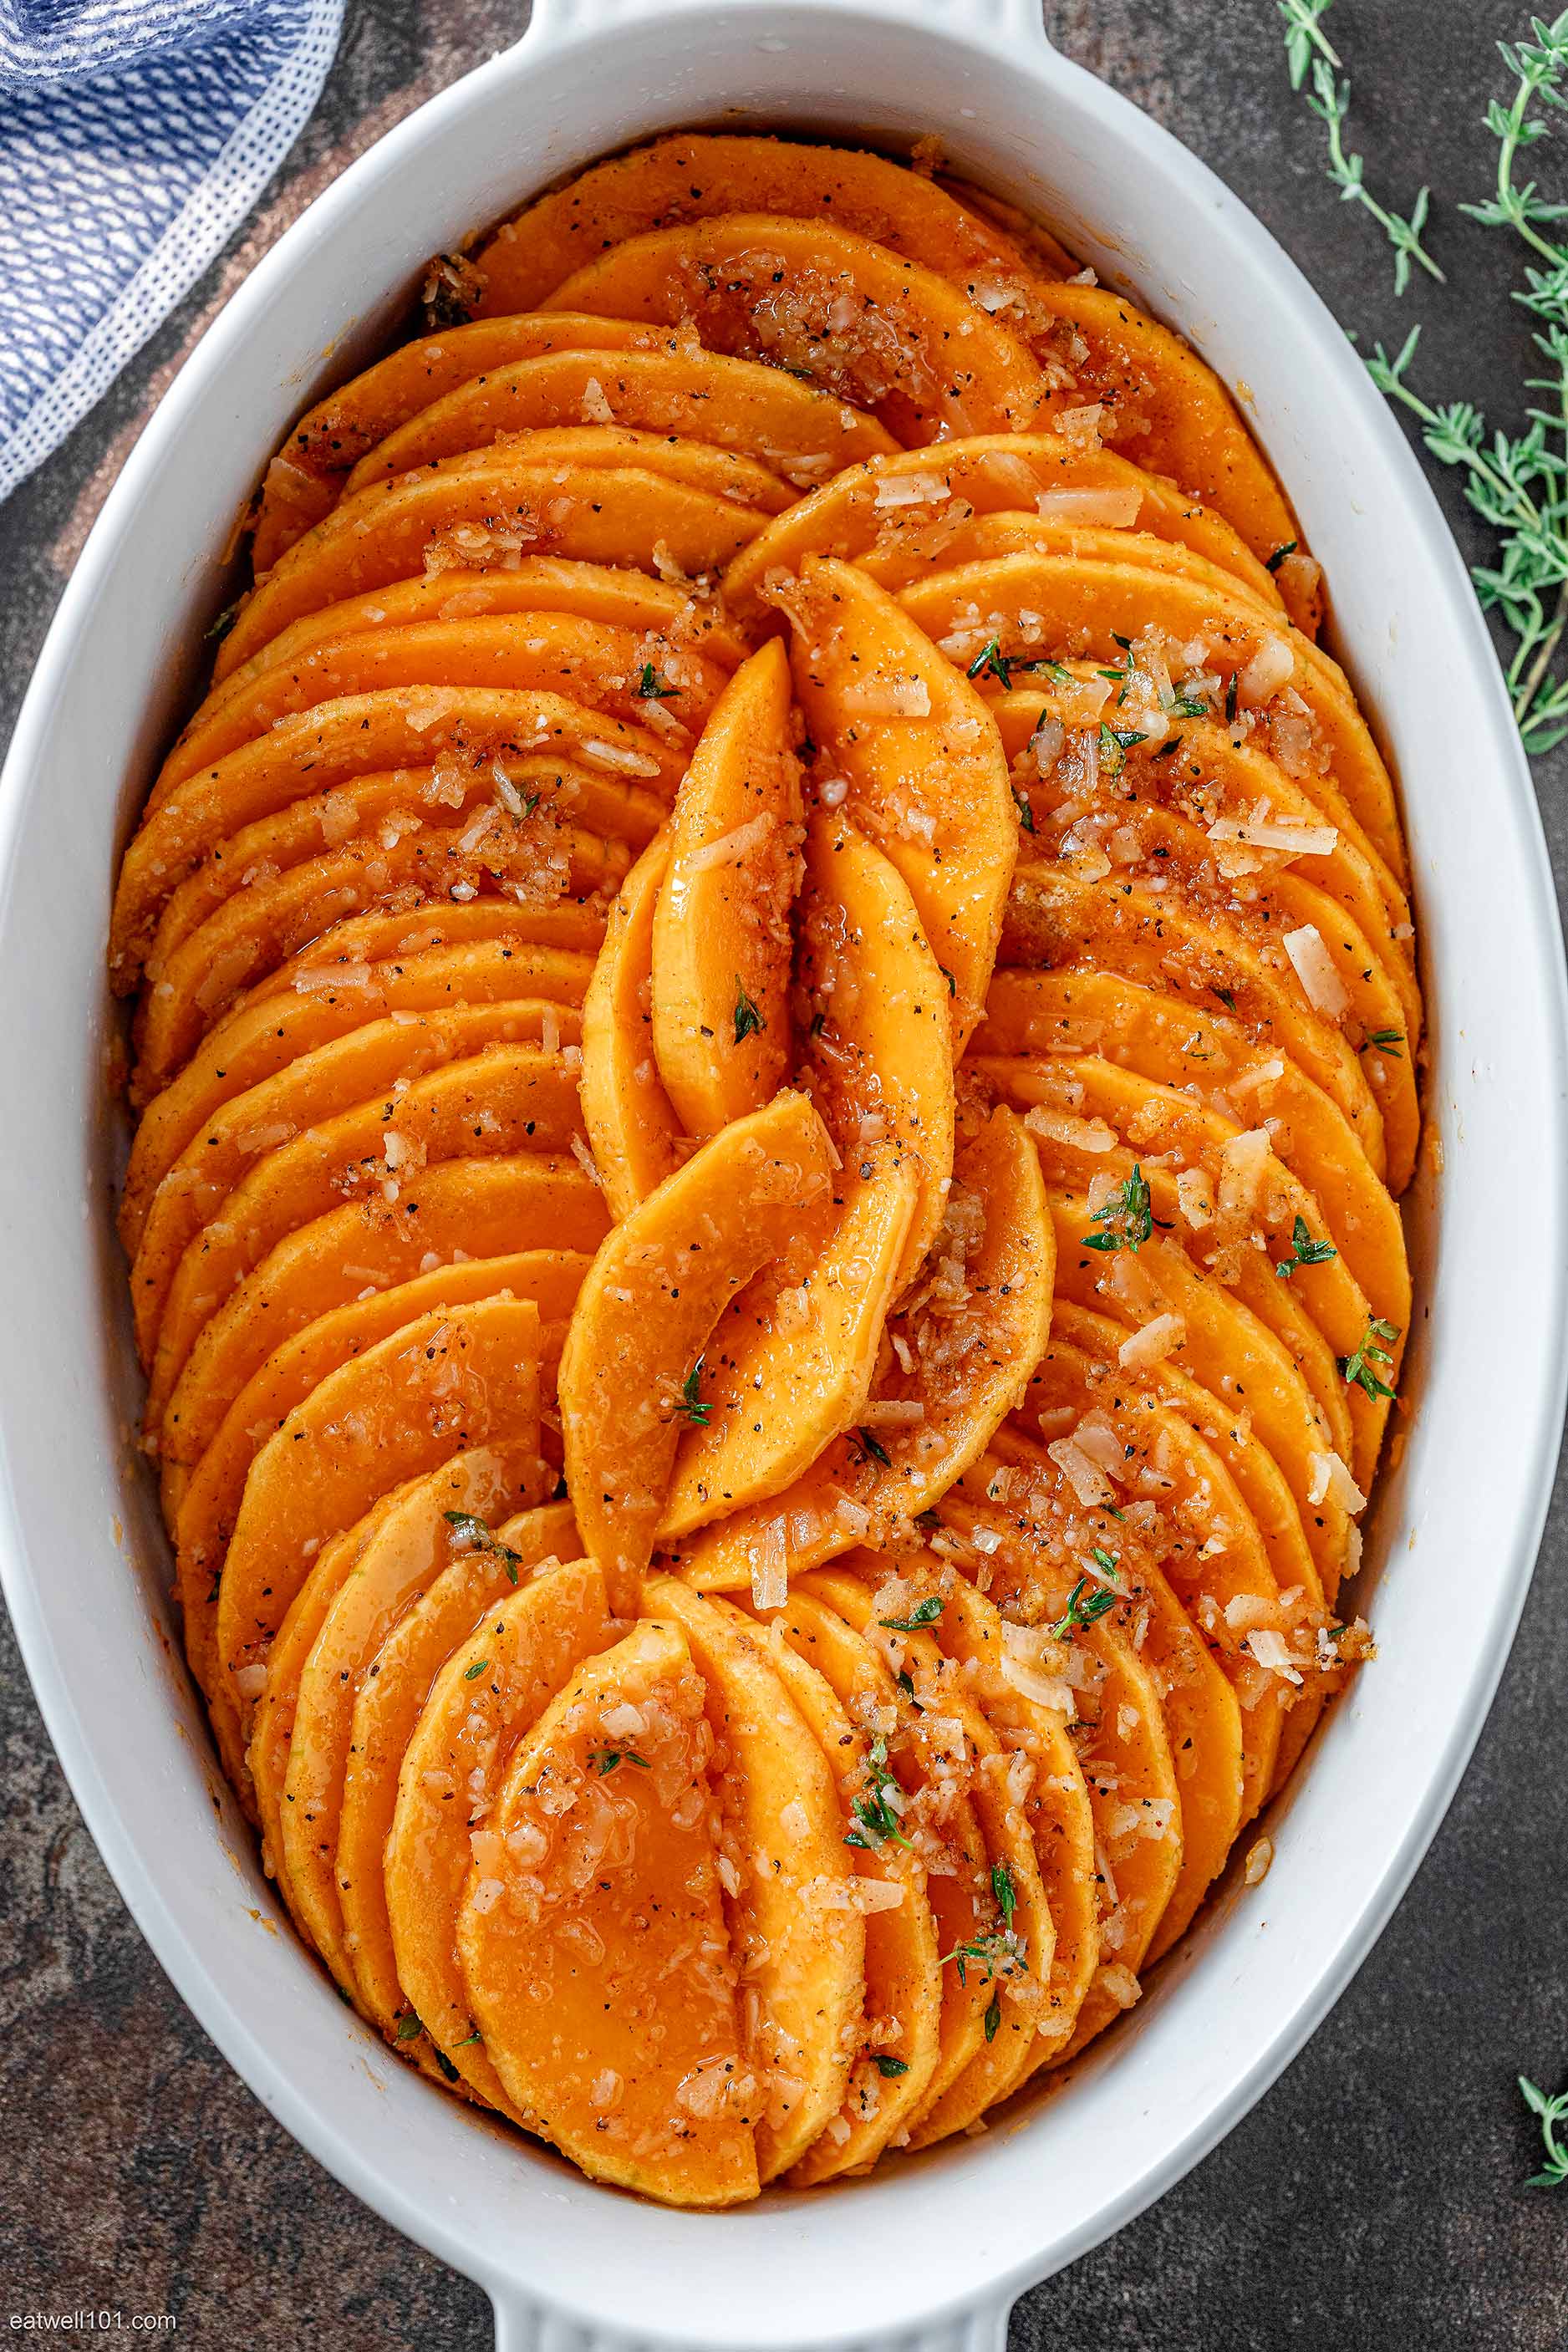 How to bake Butternut Squash